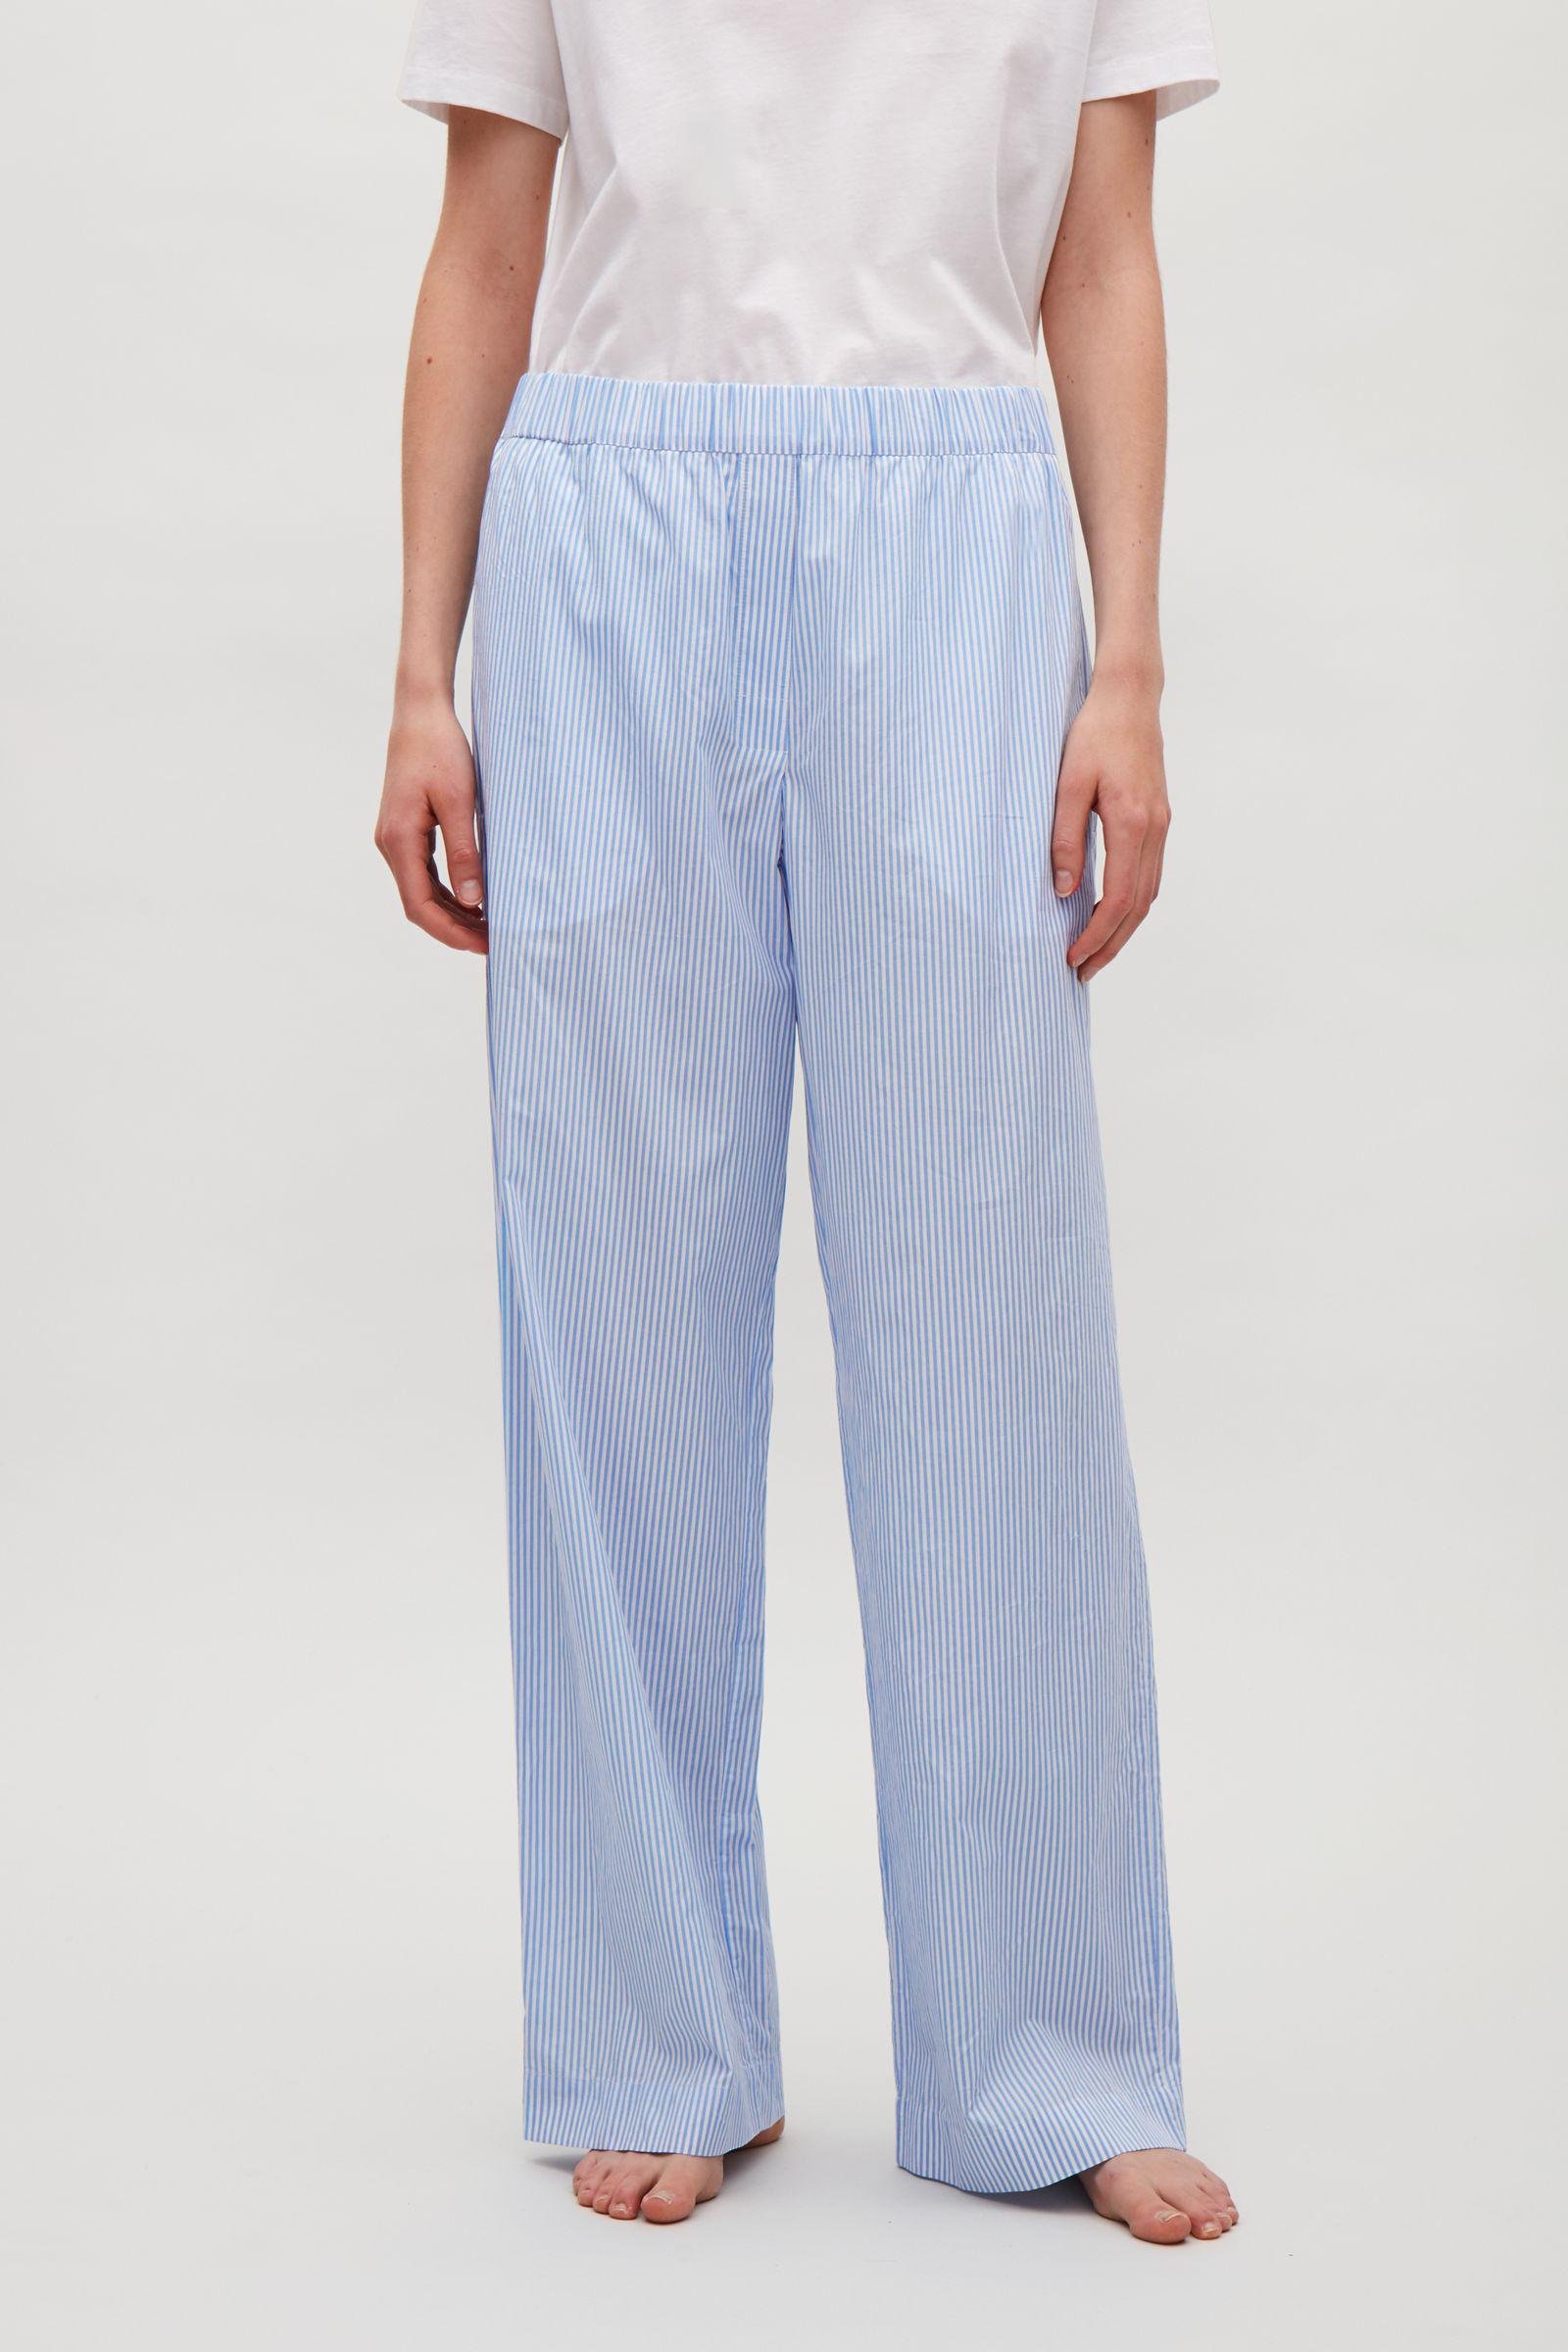 COS Striped Cotton Pyjama Trousers in Blue | Lyst